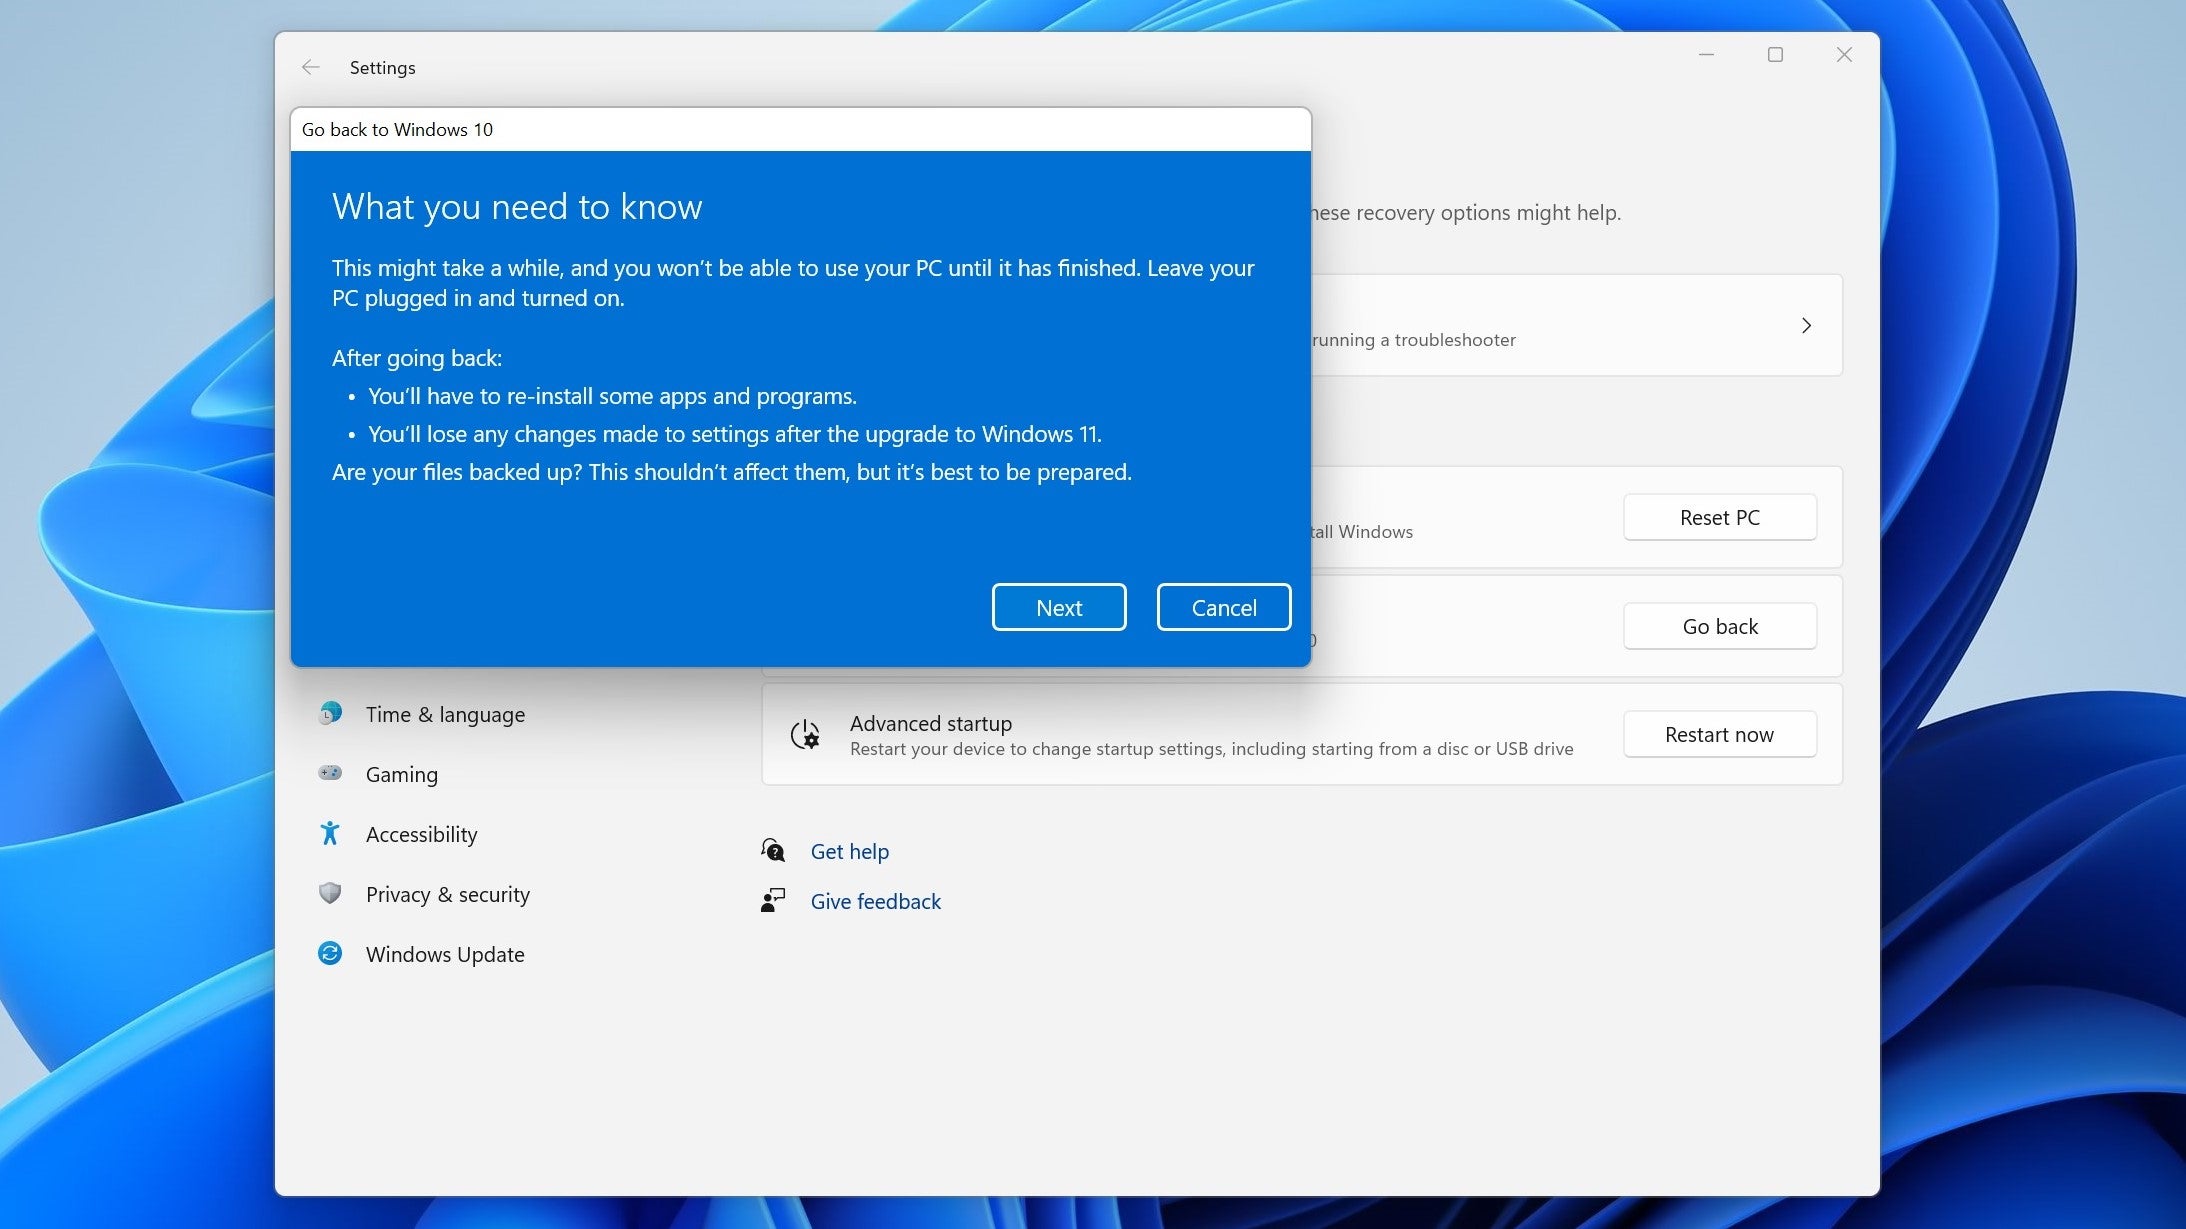 Windows 11 explaining potential steps users may need to take to preserve their files, upon reinstalling Windows 10.